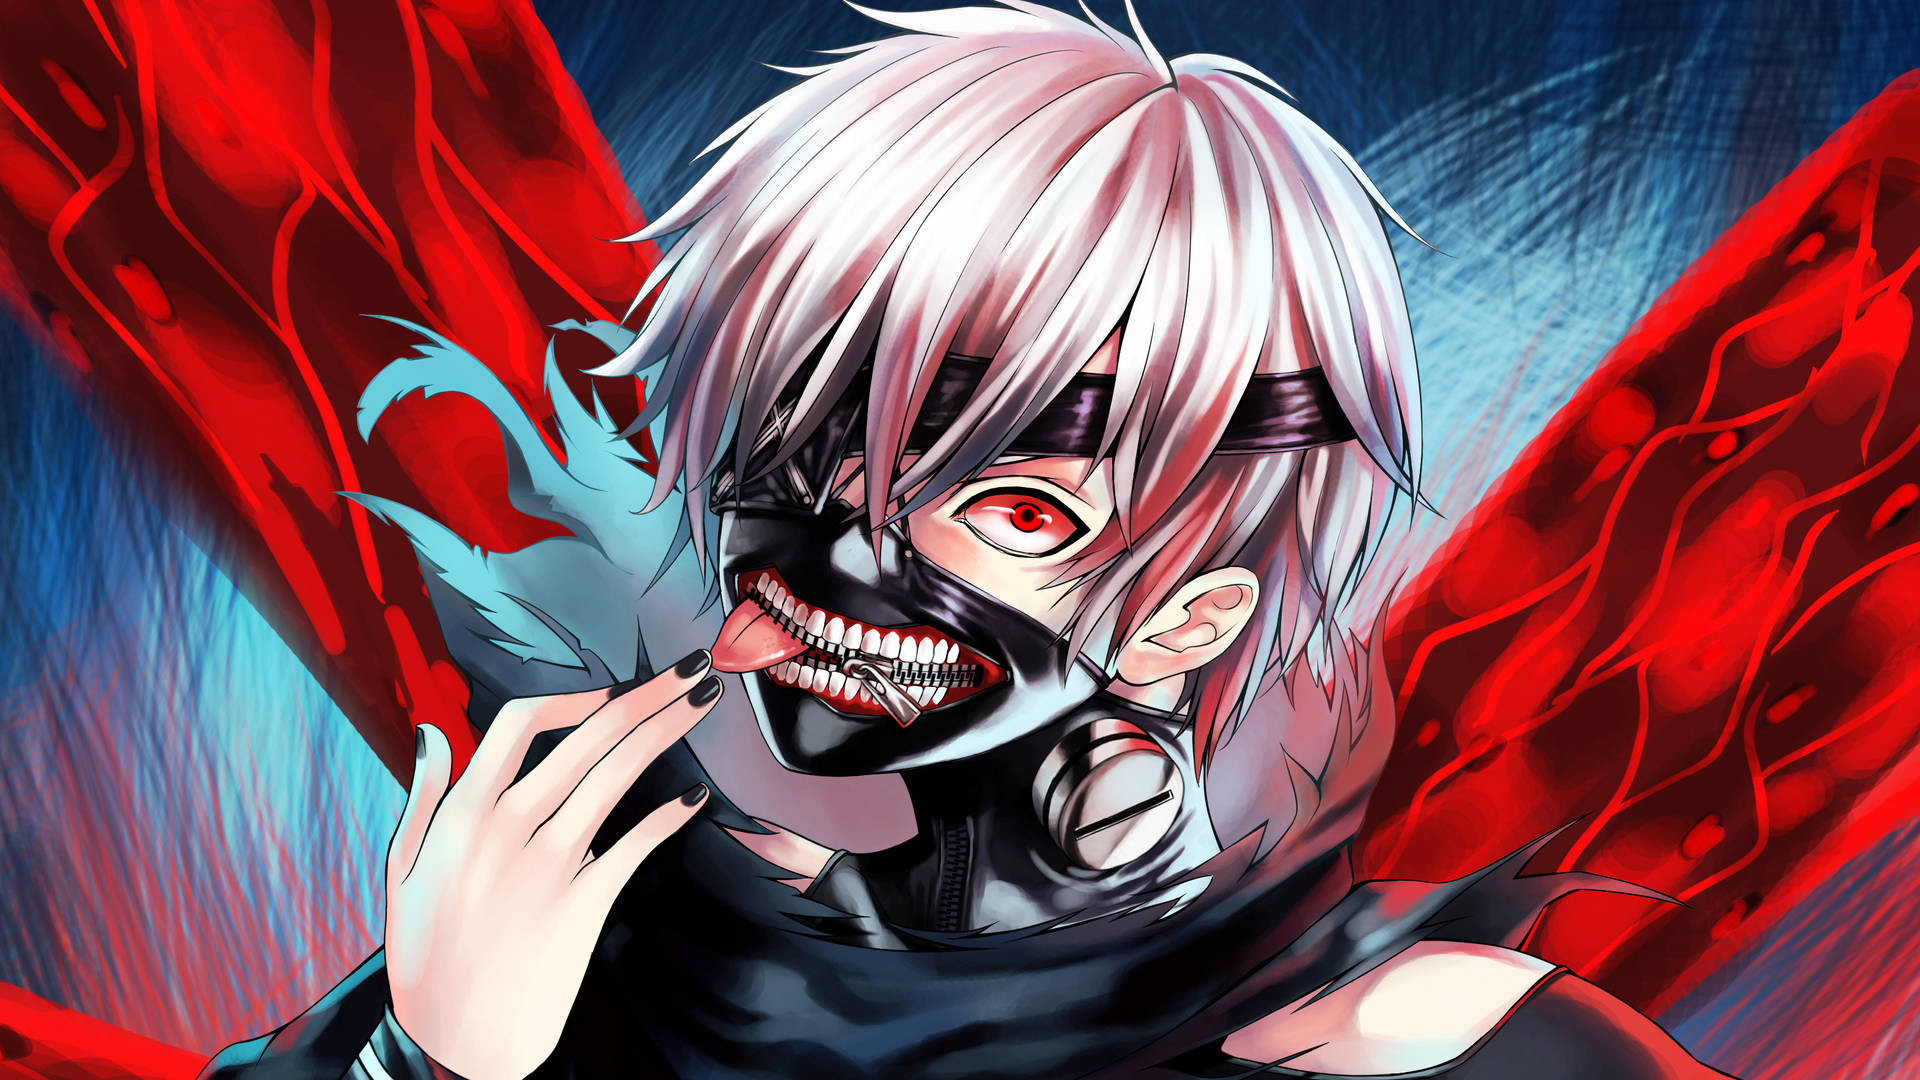 Juuzou Tokyo Ghoul 4k With Monstrous Mask Wallpaper